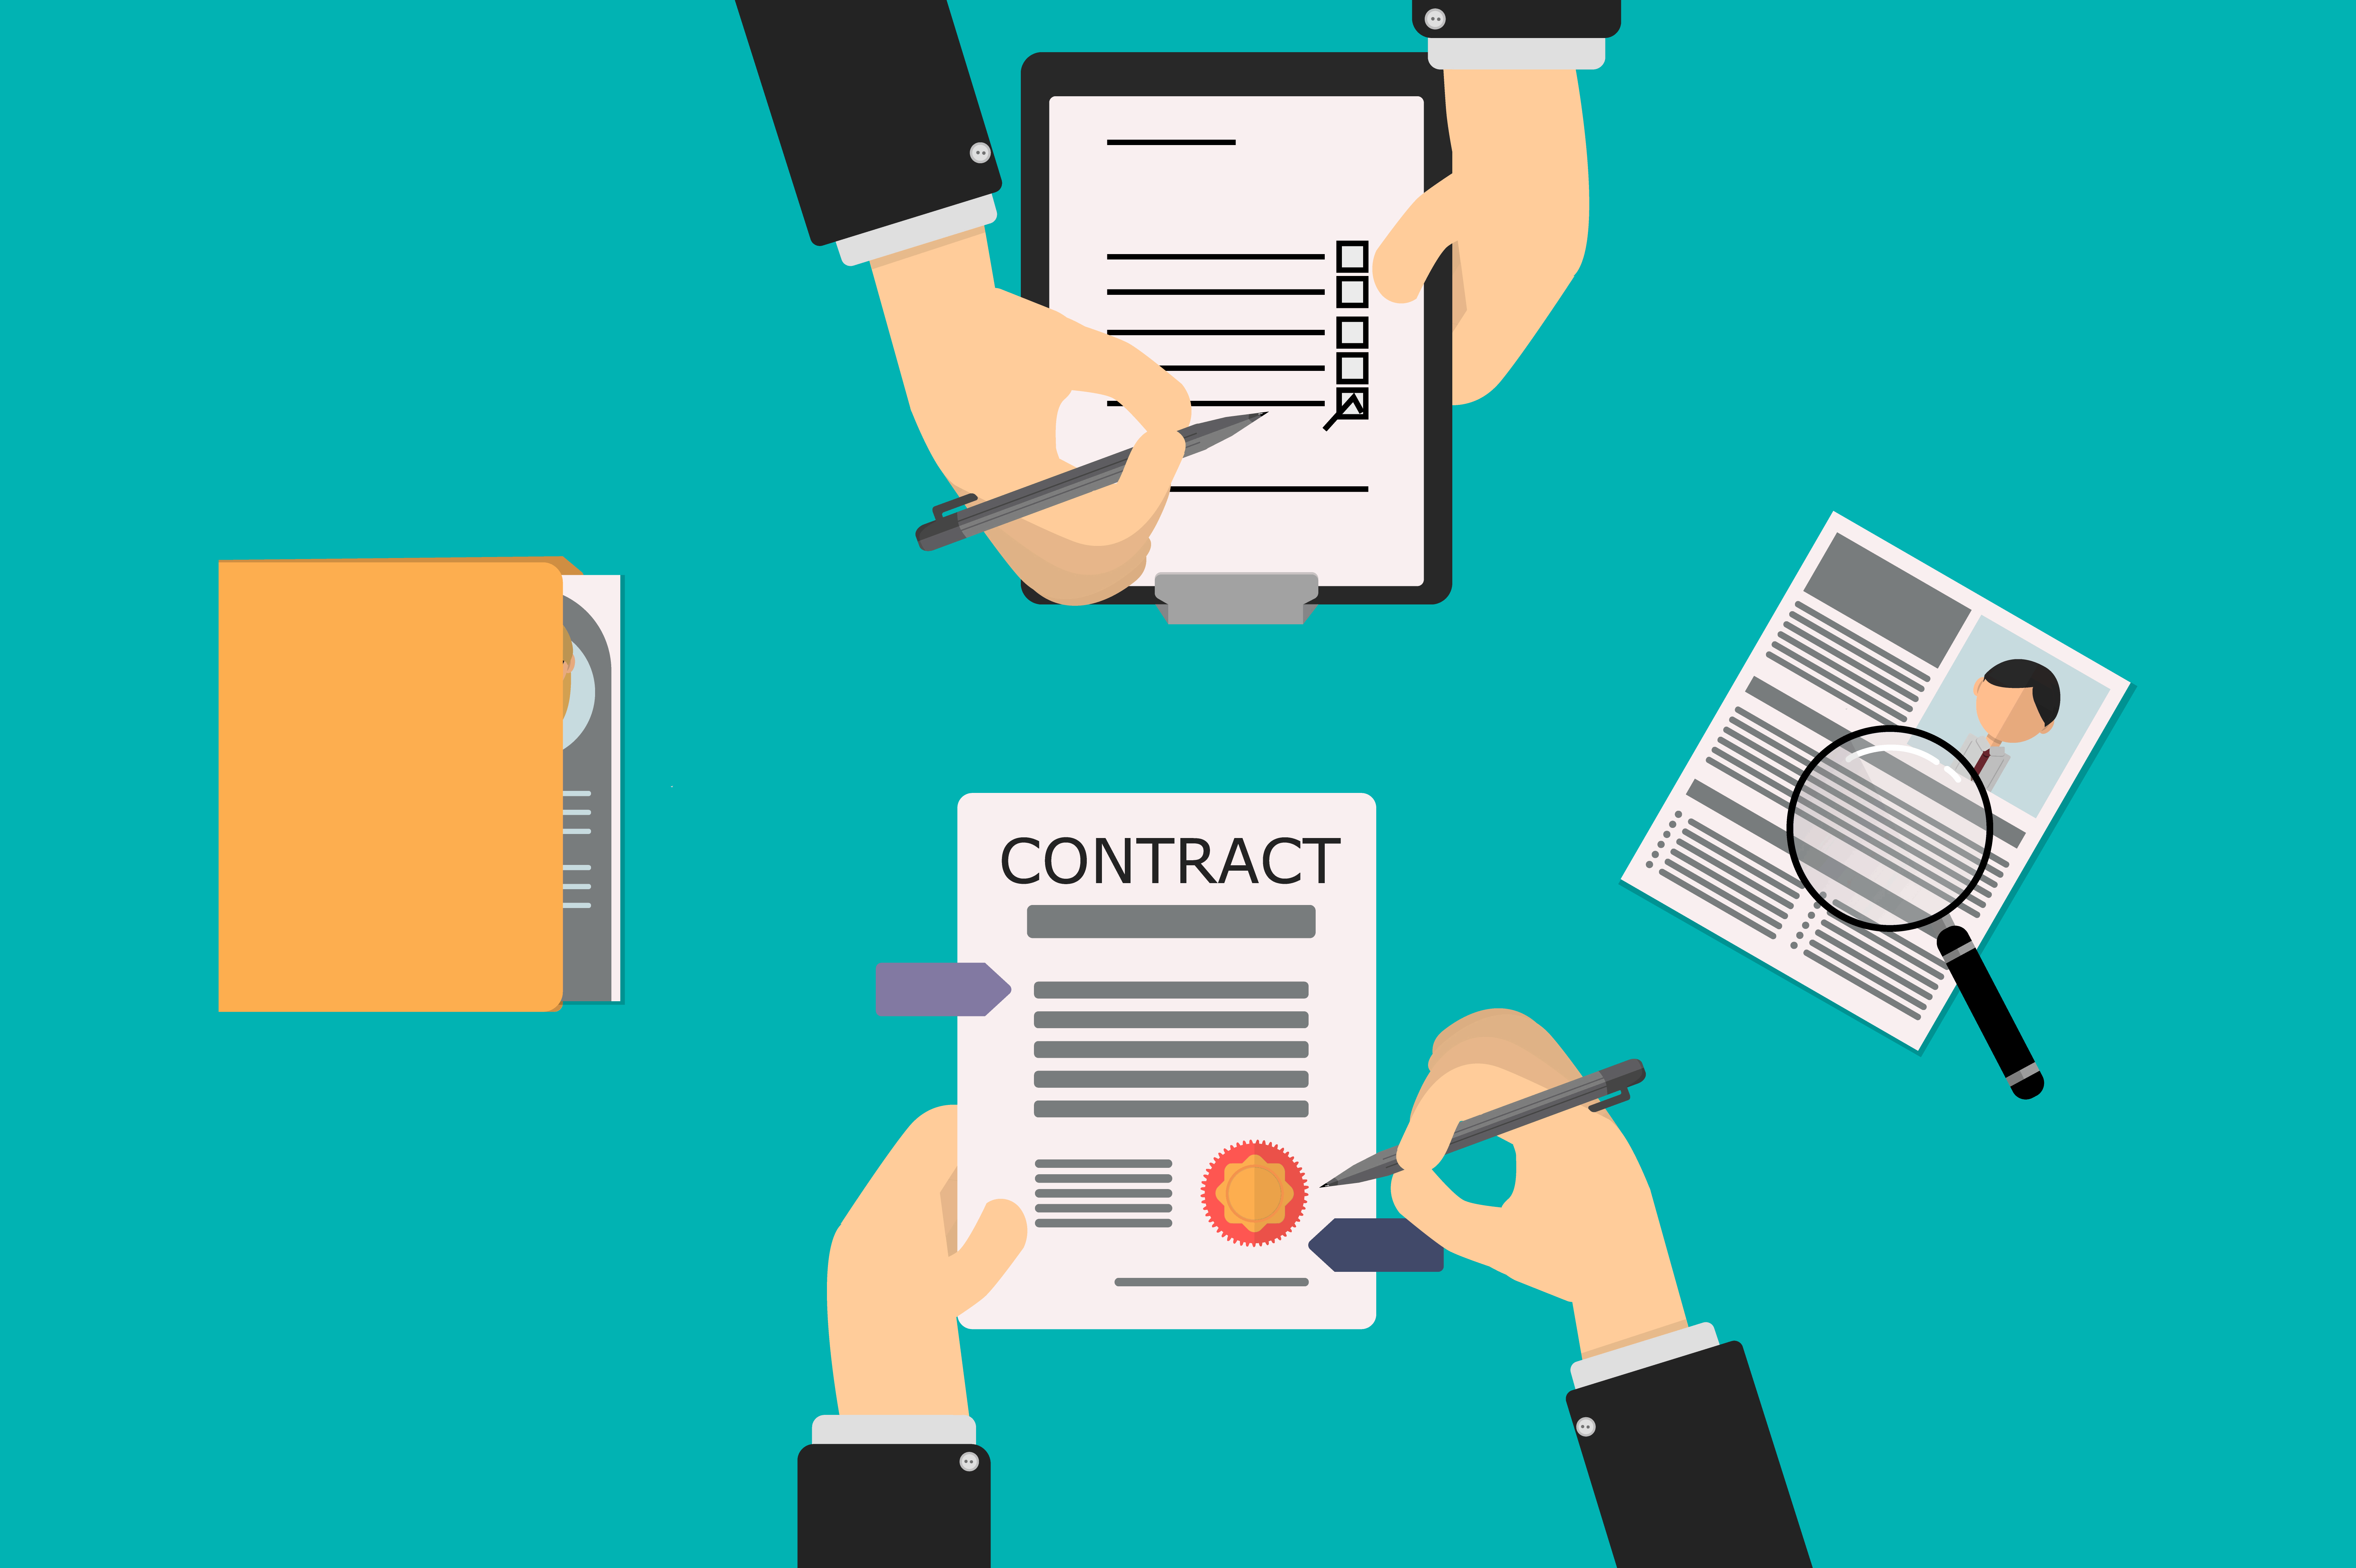 Should You Hire Contract or Full-Time Employees?